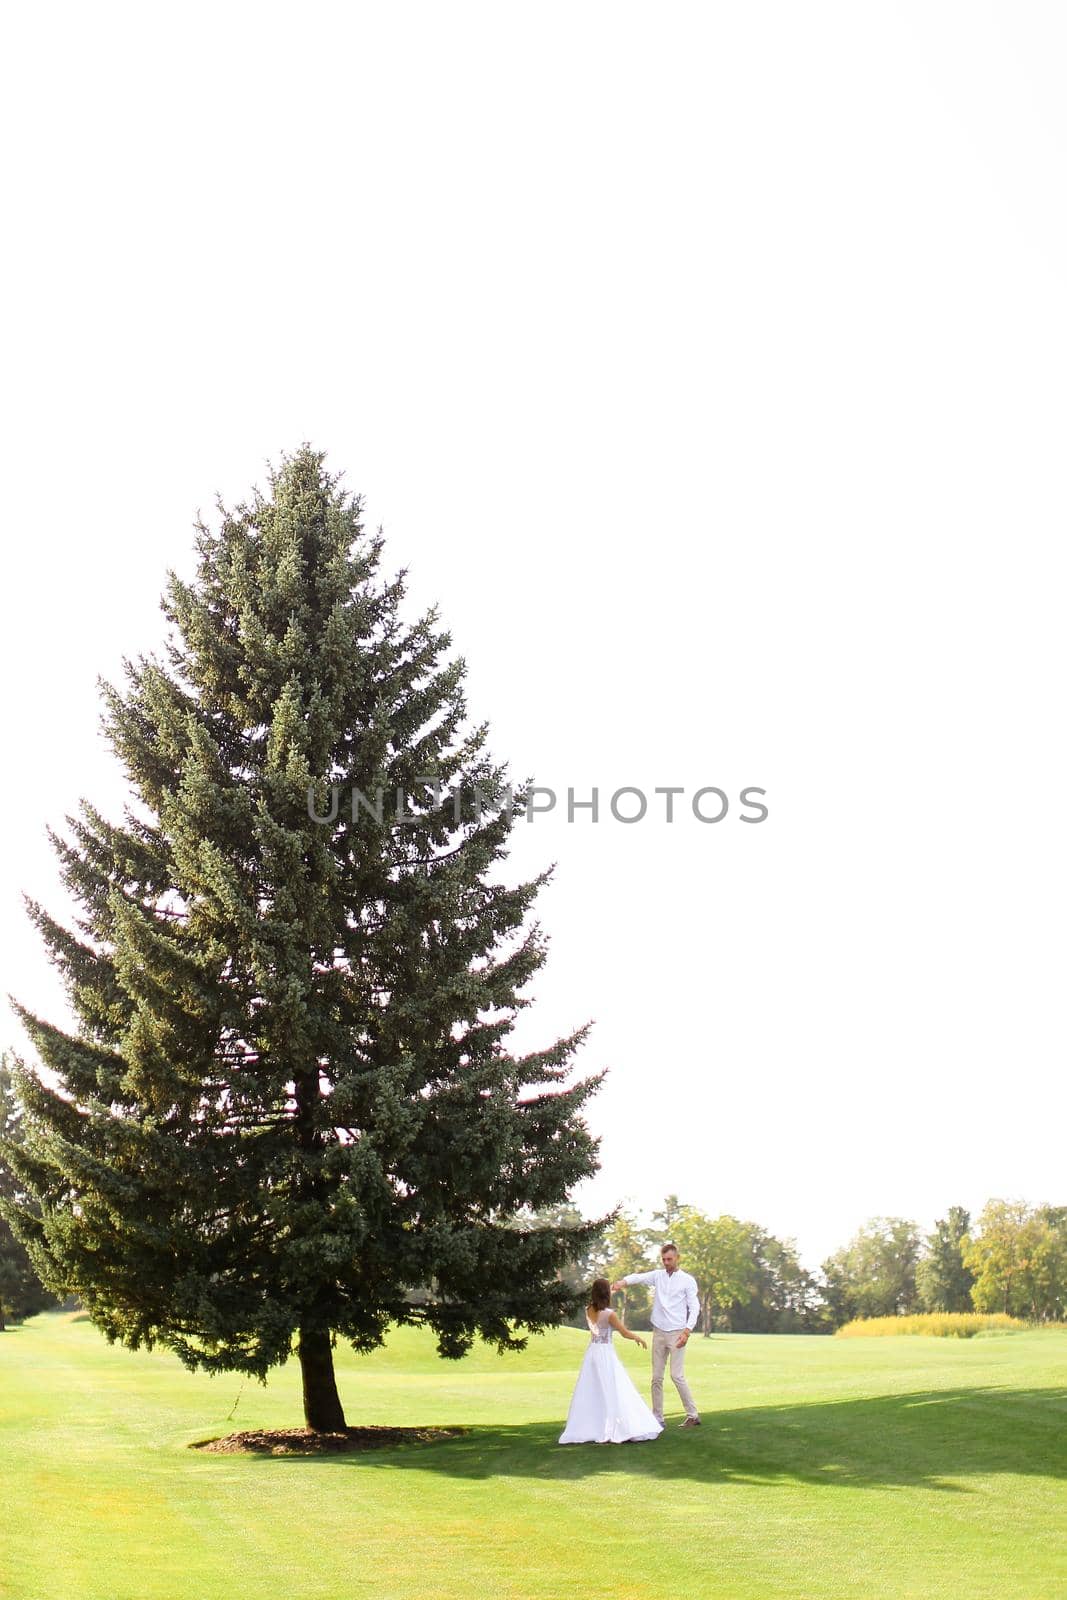 Young bride and groom walking near green big spruce on grass in white sky background. Concept of evergreens and wedding.